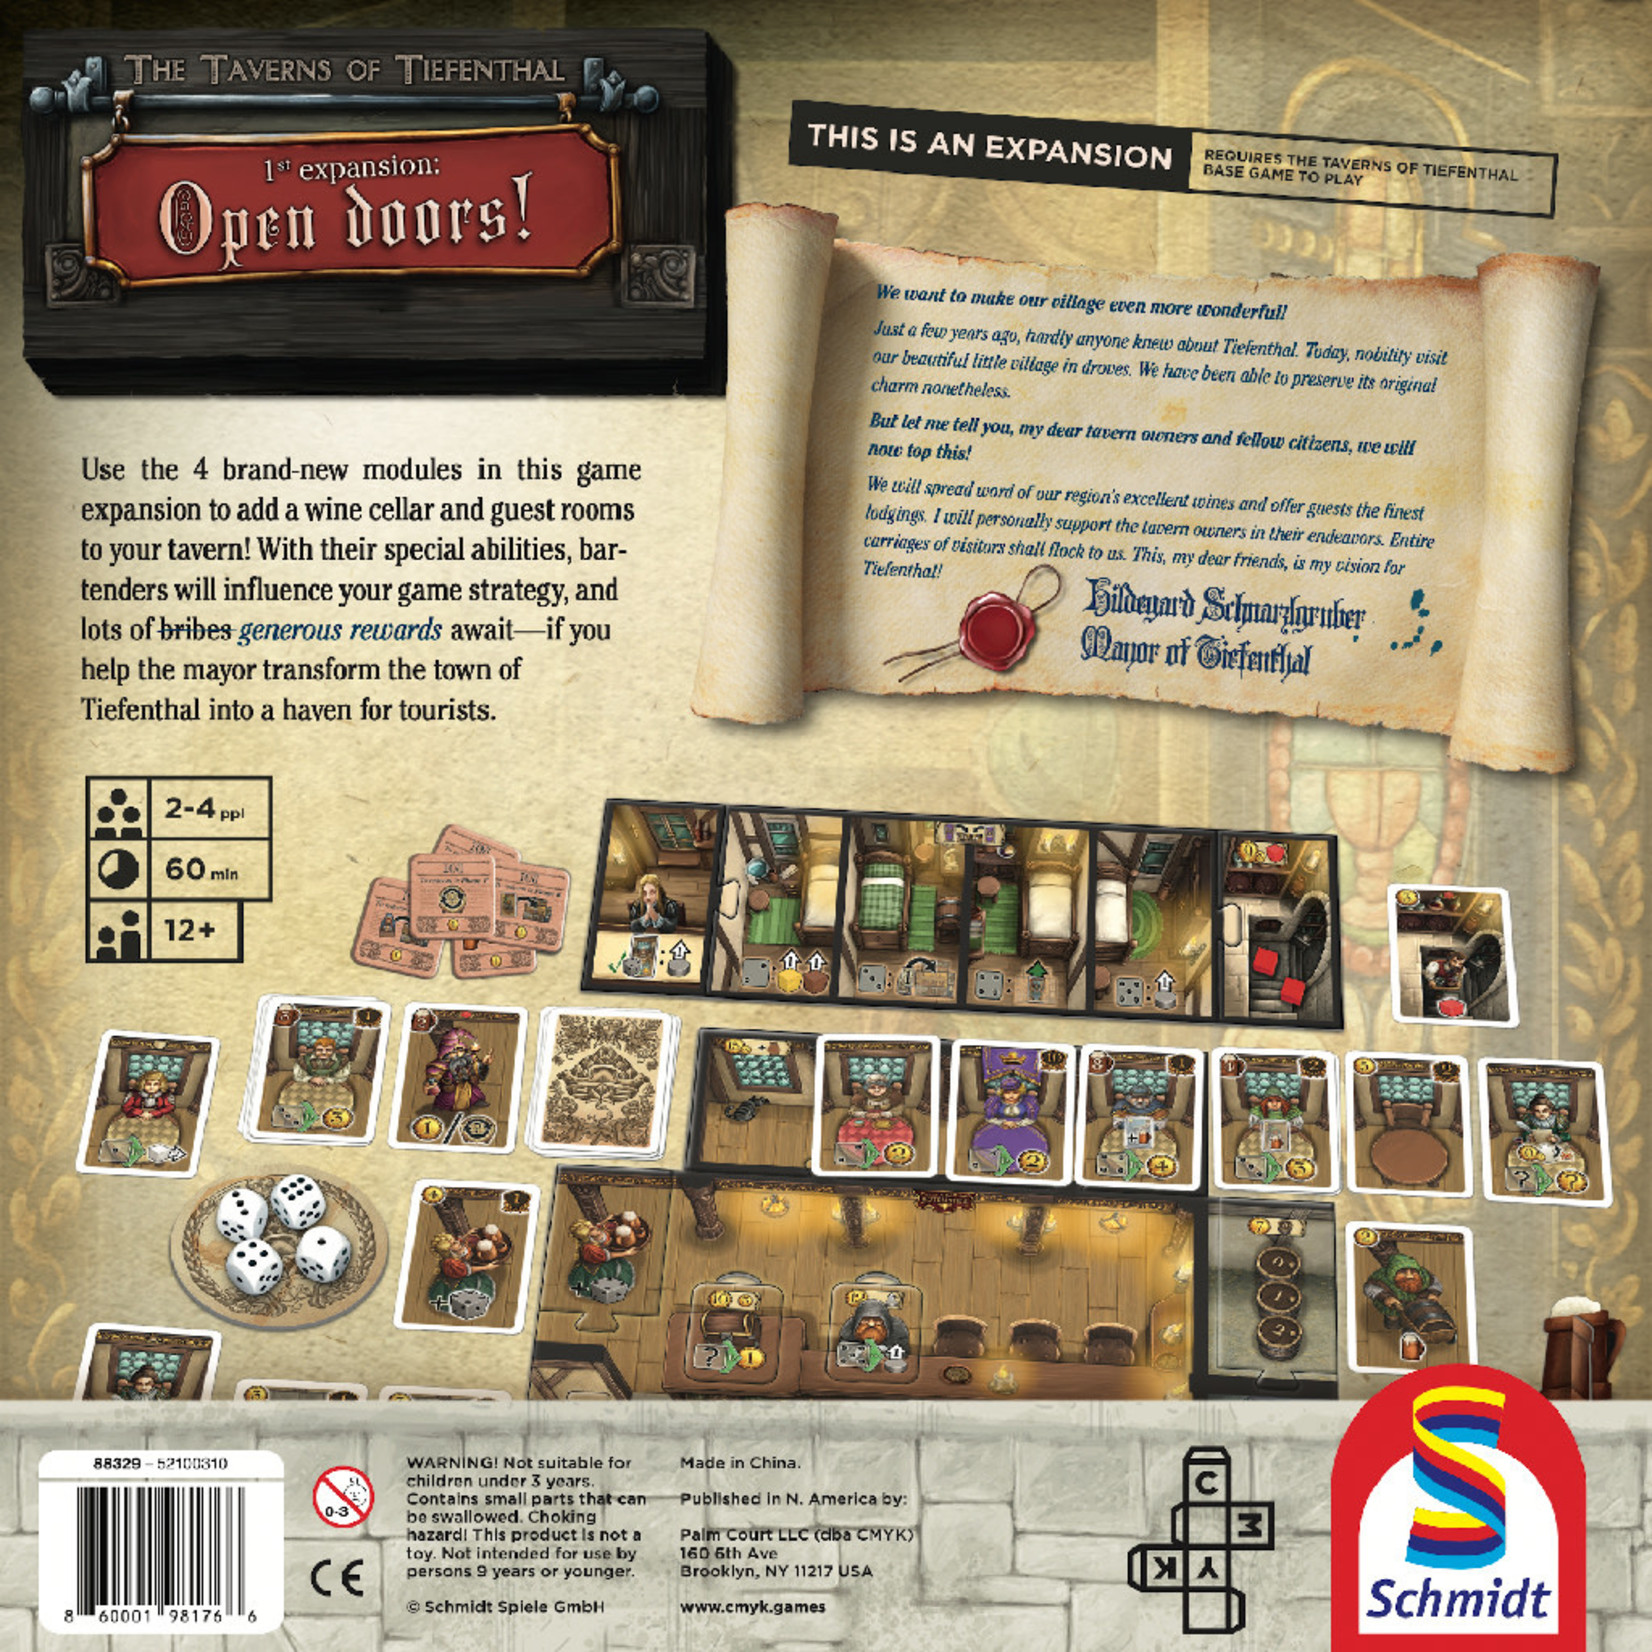 Palm Court The Taverns of Tiefenthal: Open Doors! 1st Expansion